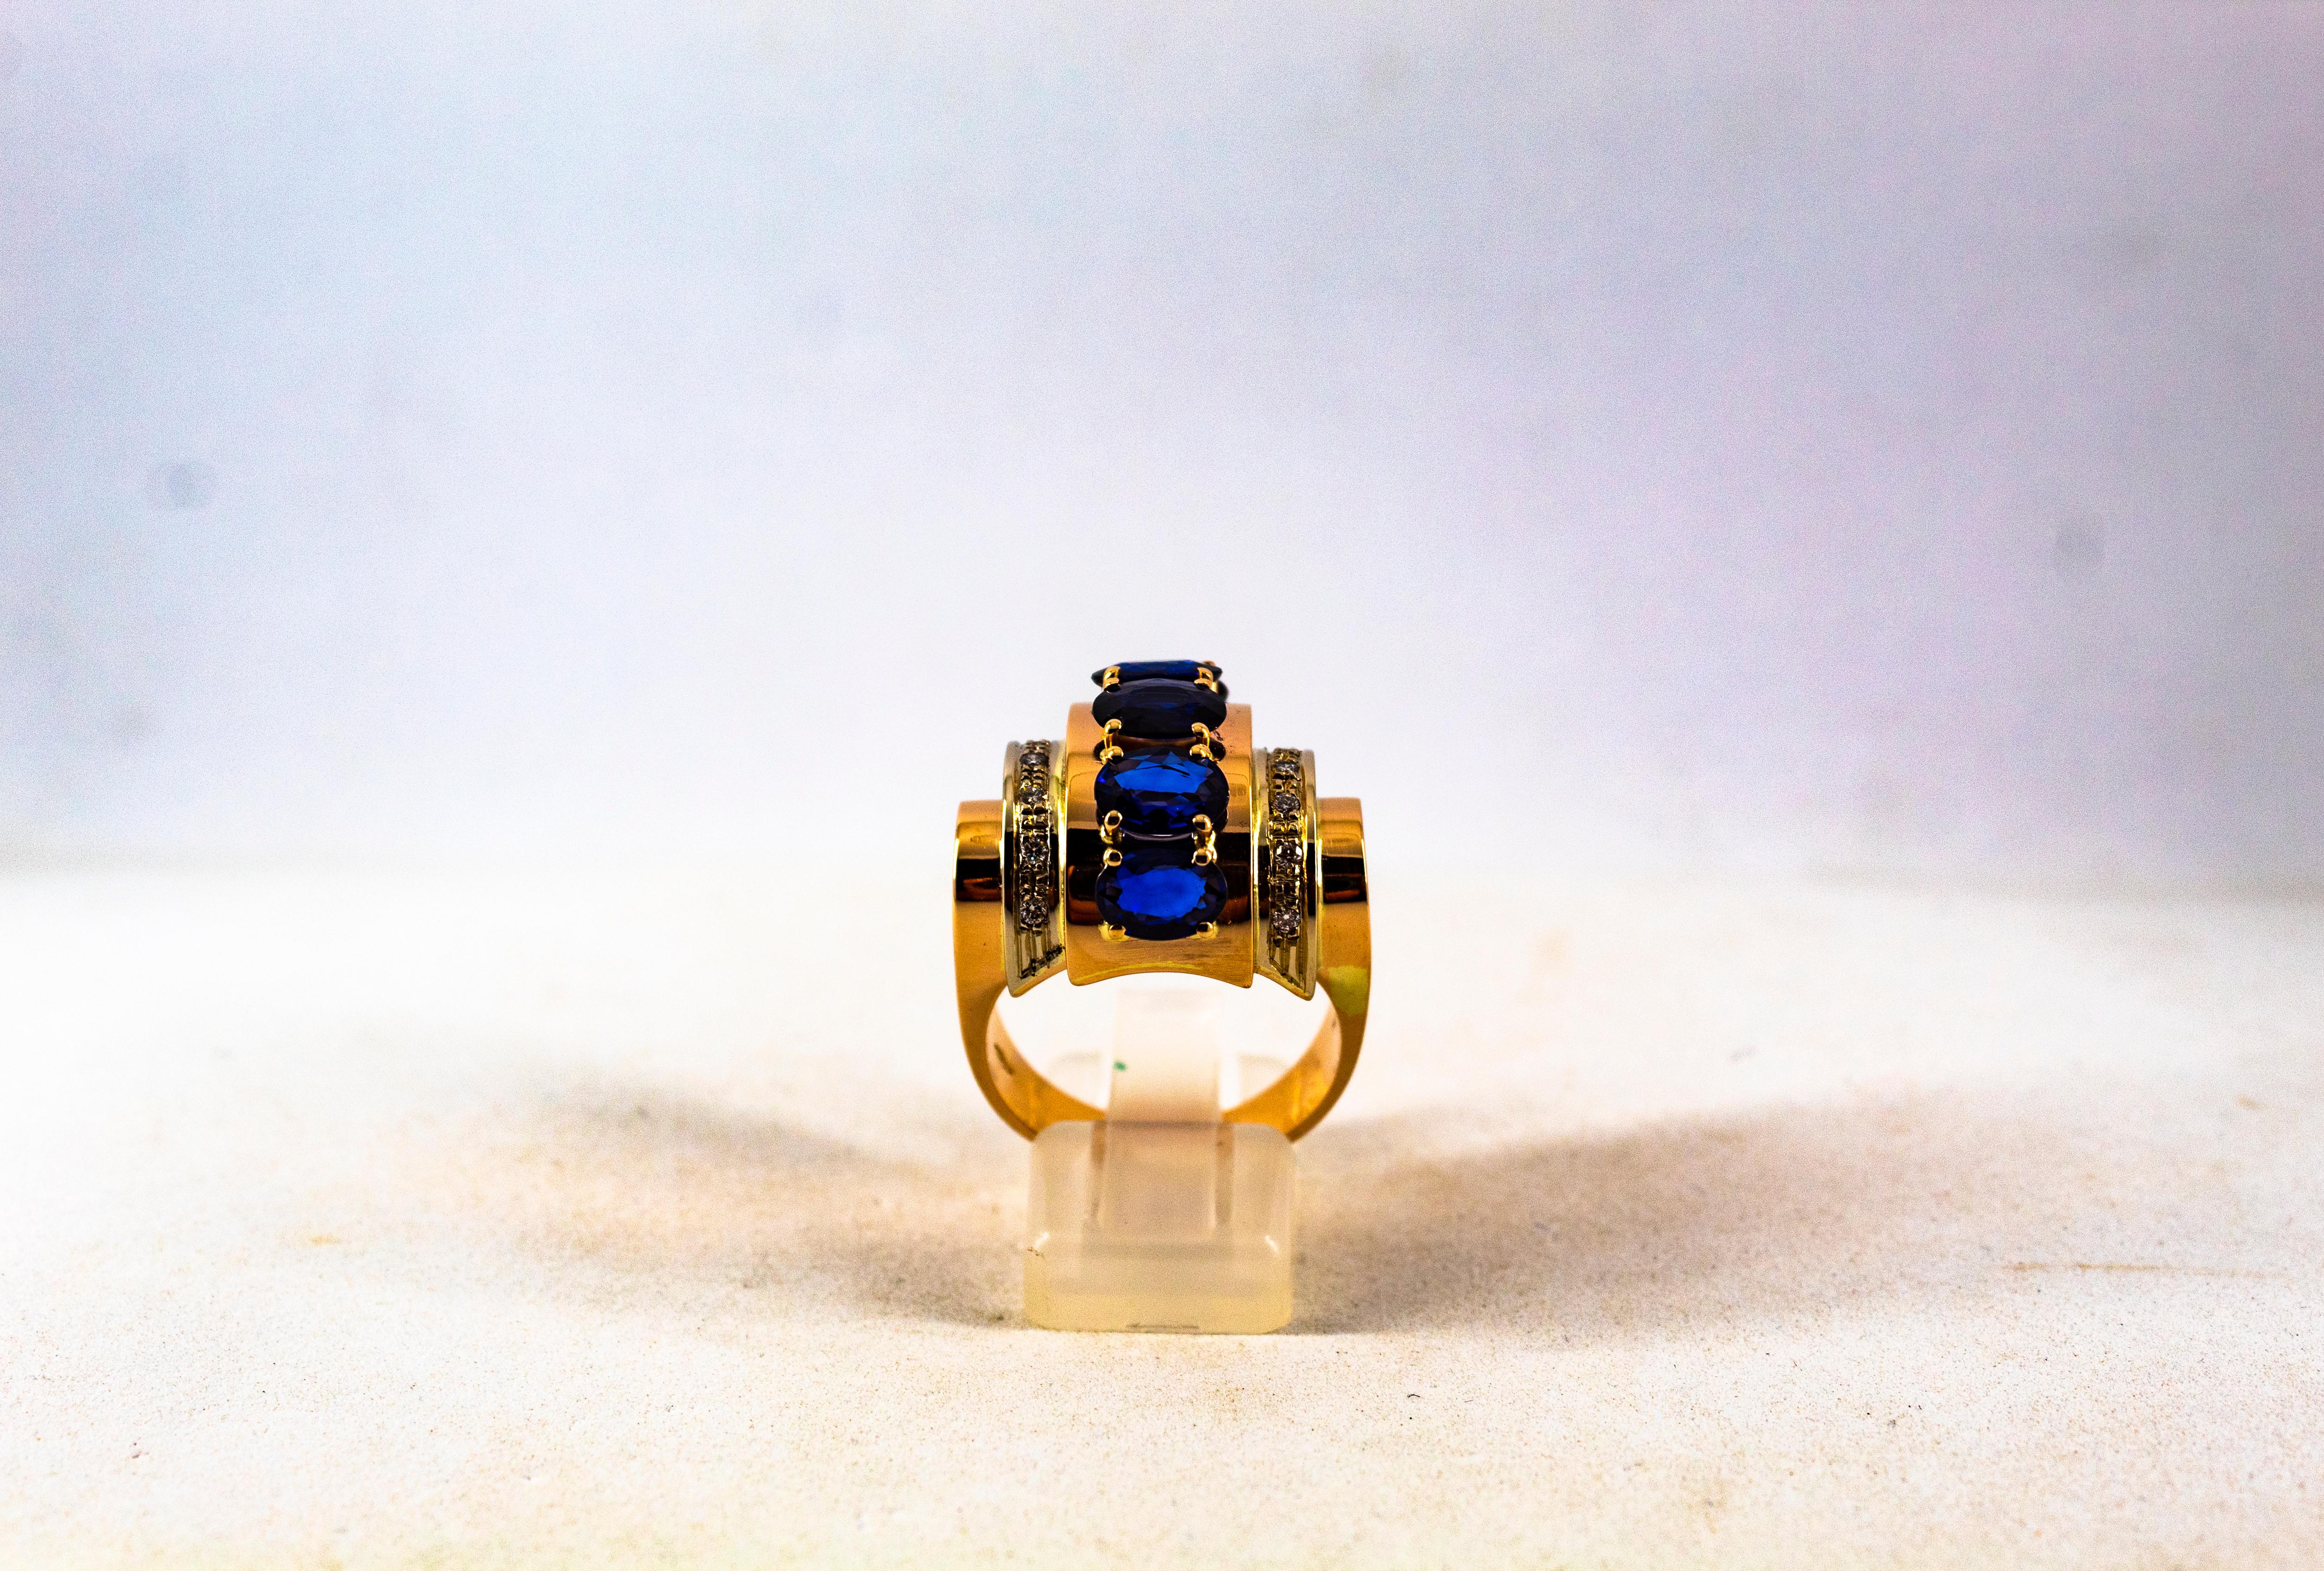 This Ring is made of 14K Yellow Gold.
This Ring has 0.30 Carats of White Brilliant Cut Diamonds.
This Ring has 3.50 Carats of Oval Cut Blue Sapphires.

This Ring is available also with Emeralds or Rubies.

Size ITA: 19 USA: 8 3/4

We're a workshop